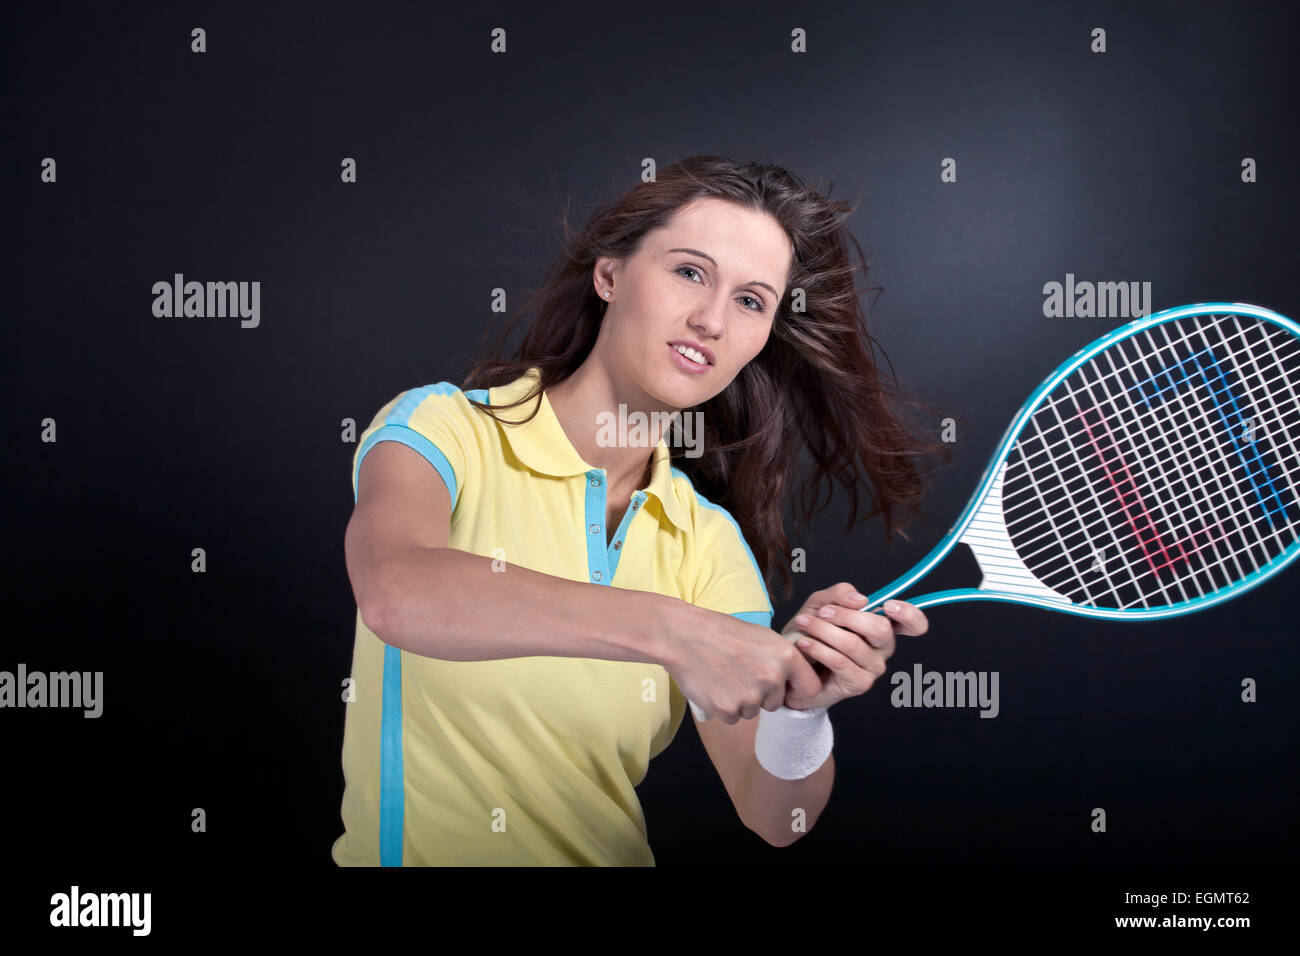 female tennis player with a racket Stock Photo